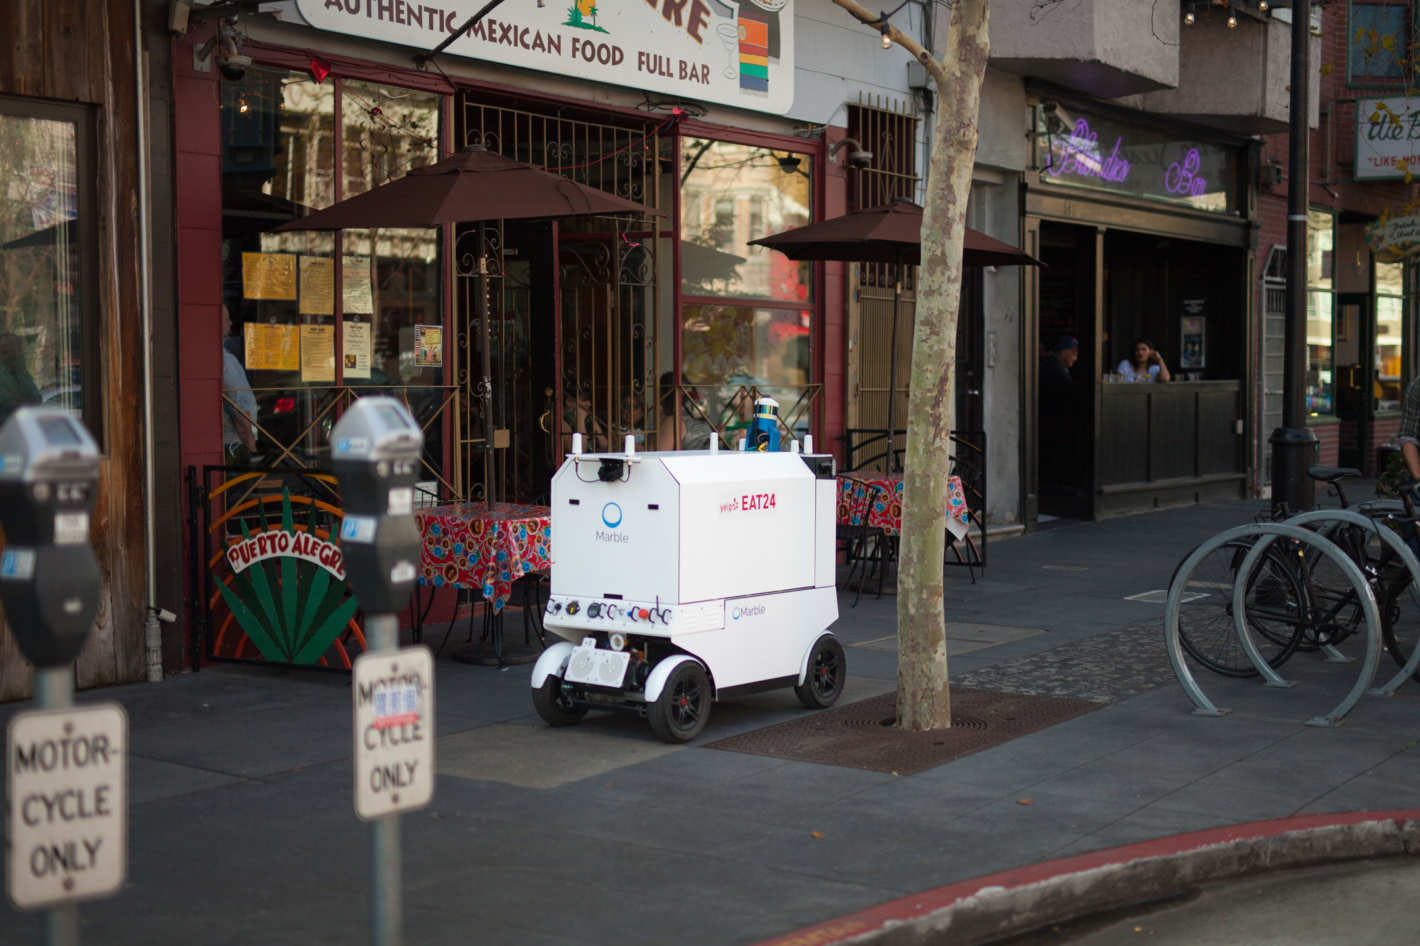 Yelp and Eat24 conducted a food delivery pilot bringing Marble’s robots to San Francisco in 2017. (Image: Marble)